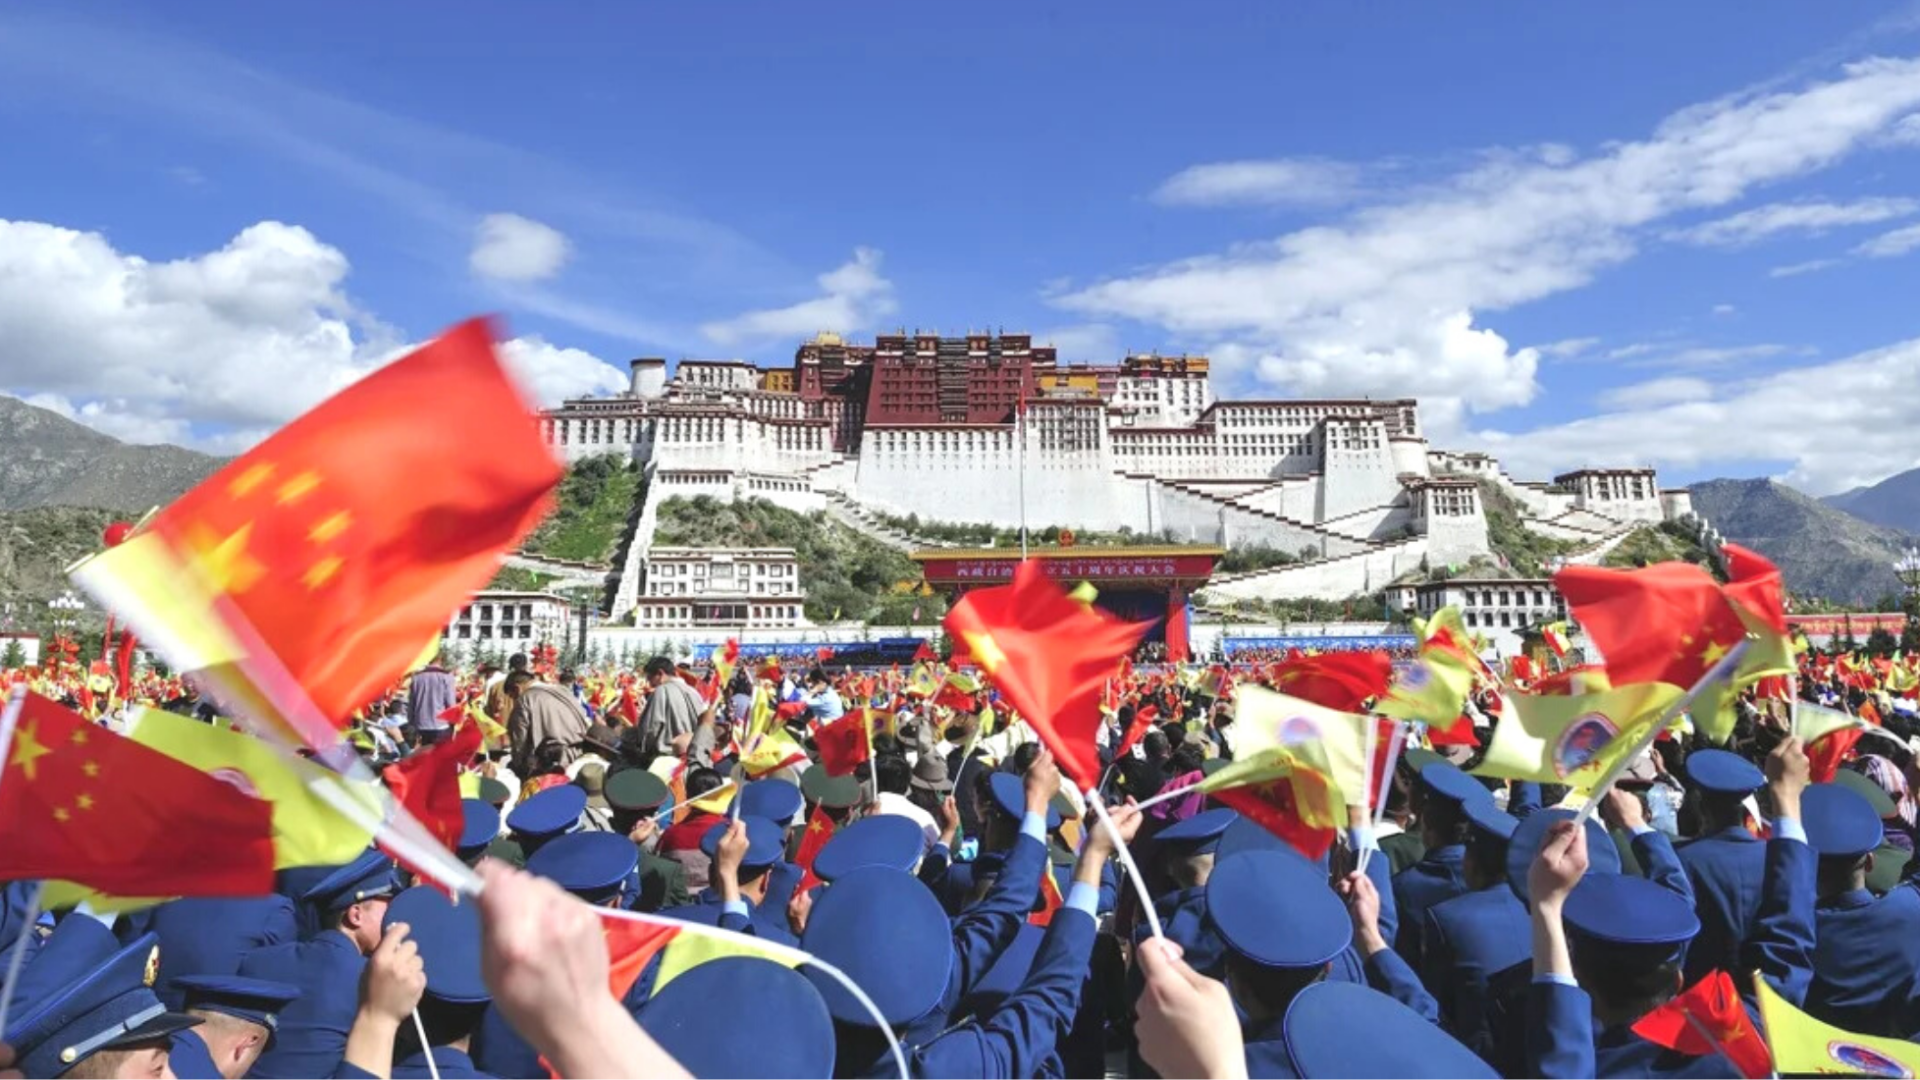 A rally held to mark the 50th anniversary of the formation of Tibet's regional government. (Photo AP)